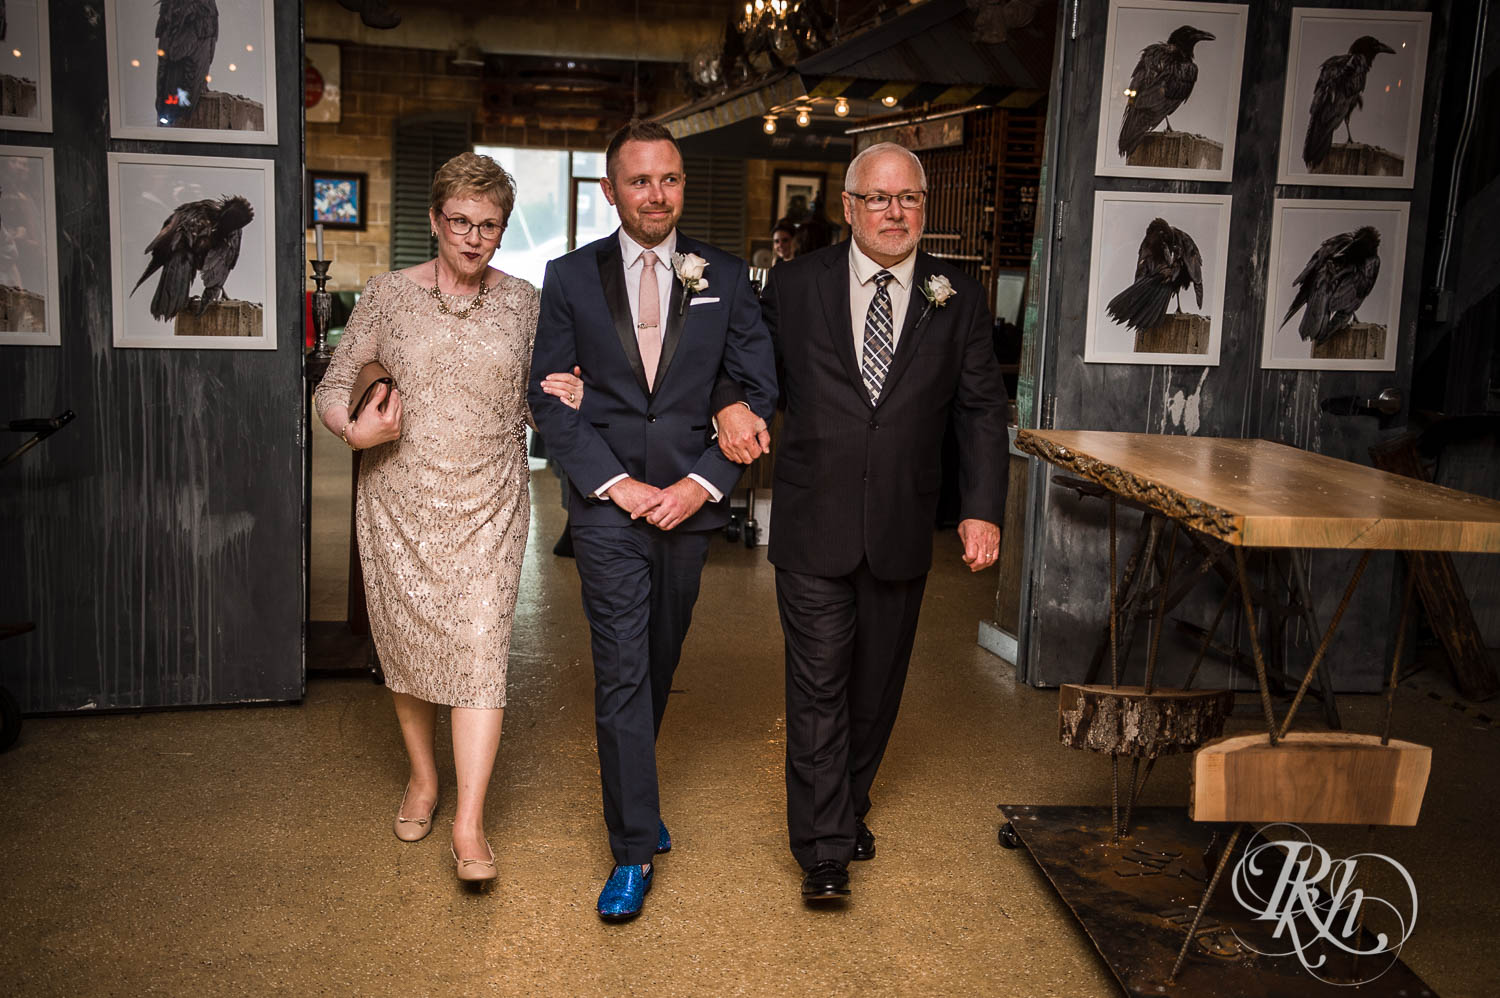 Groom walks down the aisle with parents at Warehouse Winery wedding in Saint Louis Park, Minnesota.